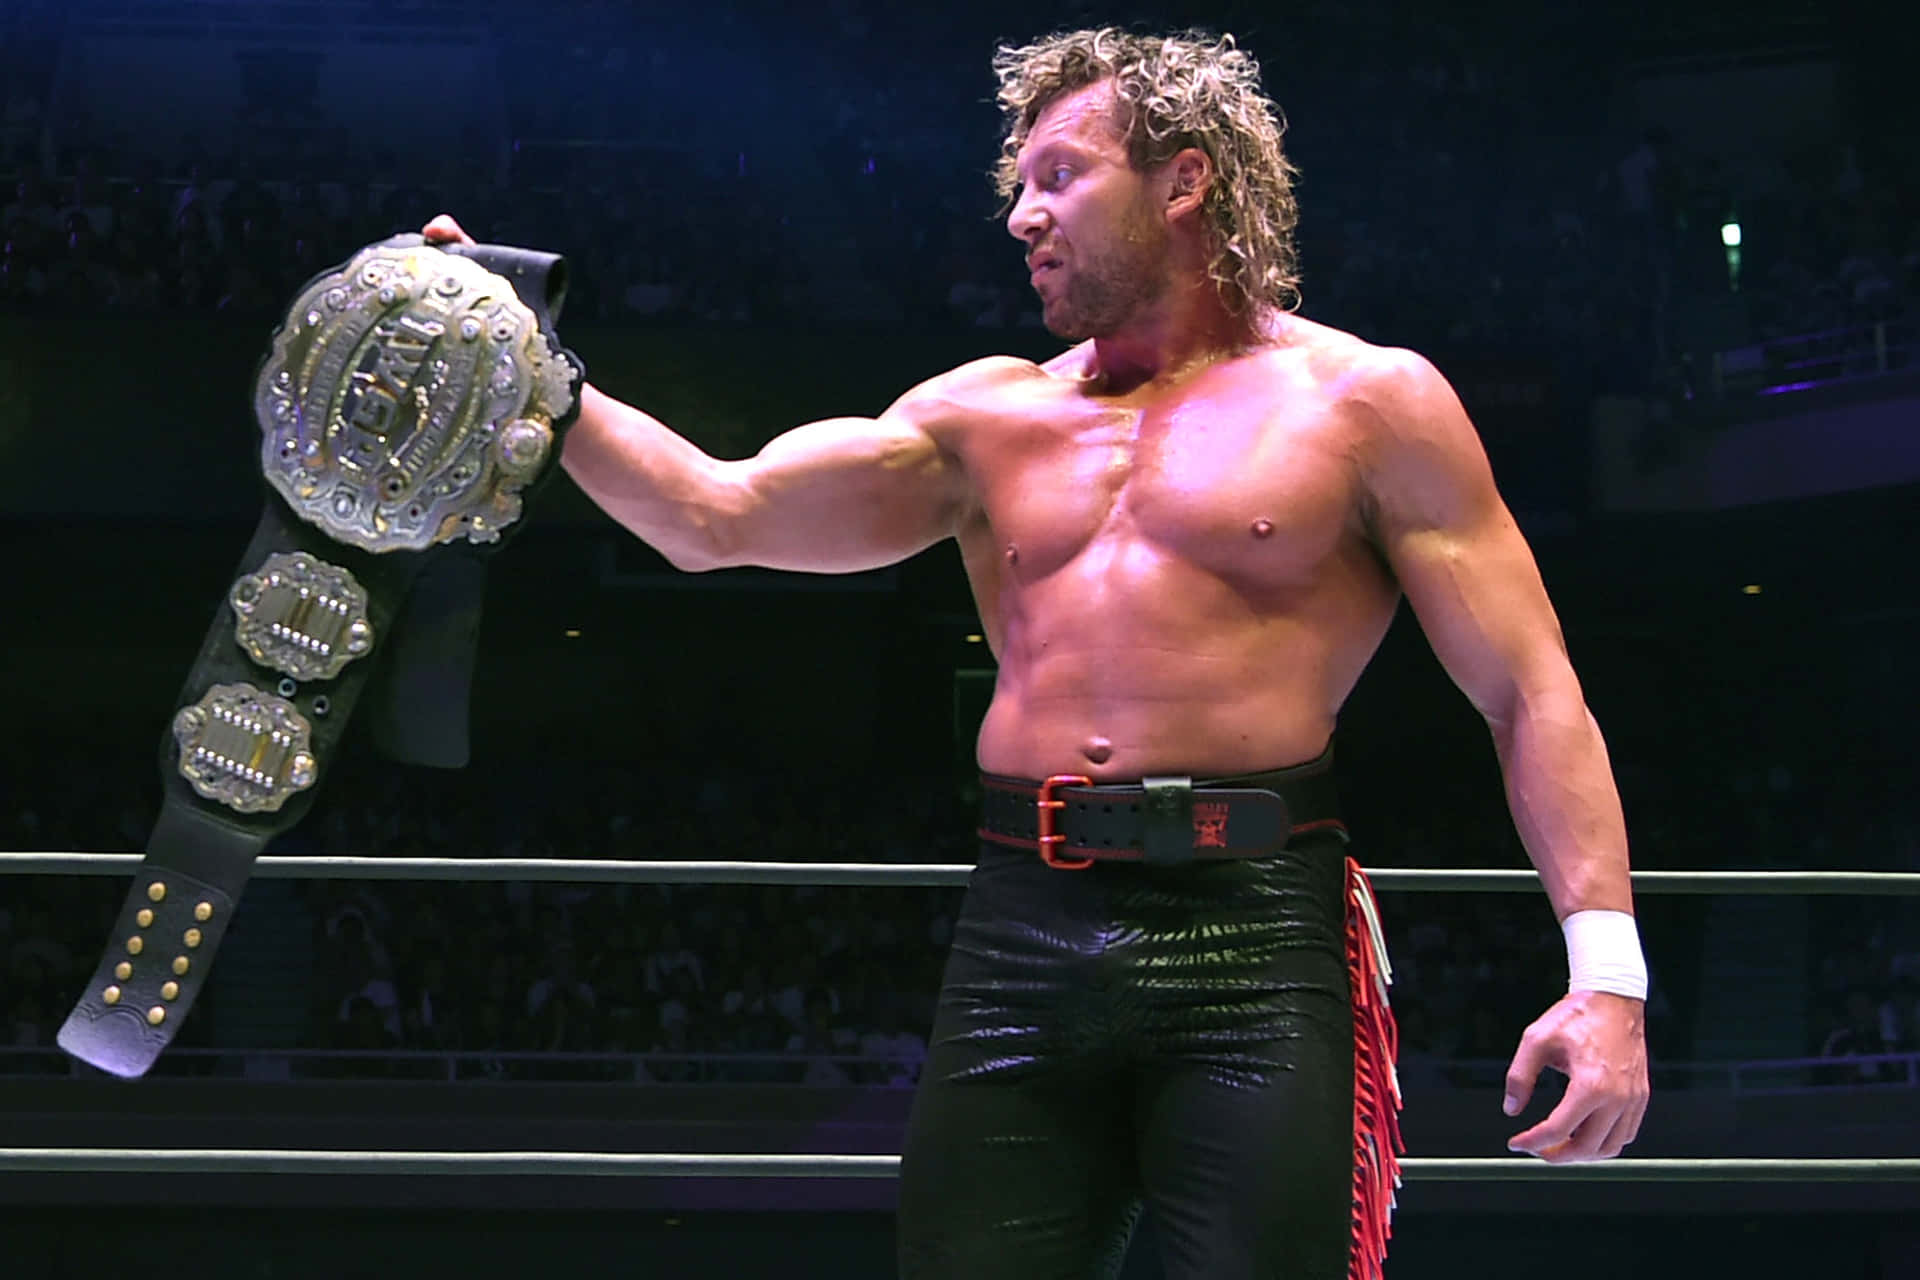 Kenny Omega Looking At His Championship Belt Background